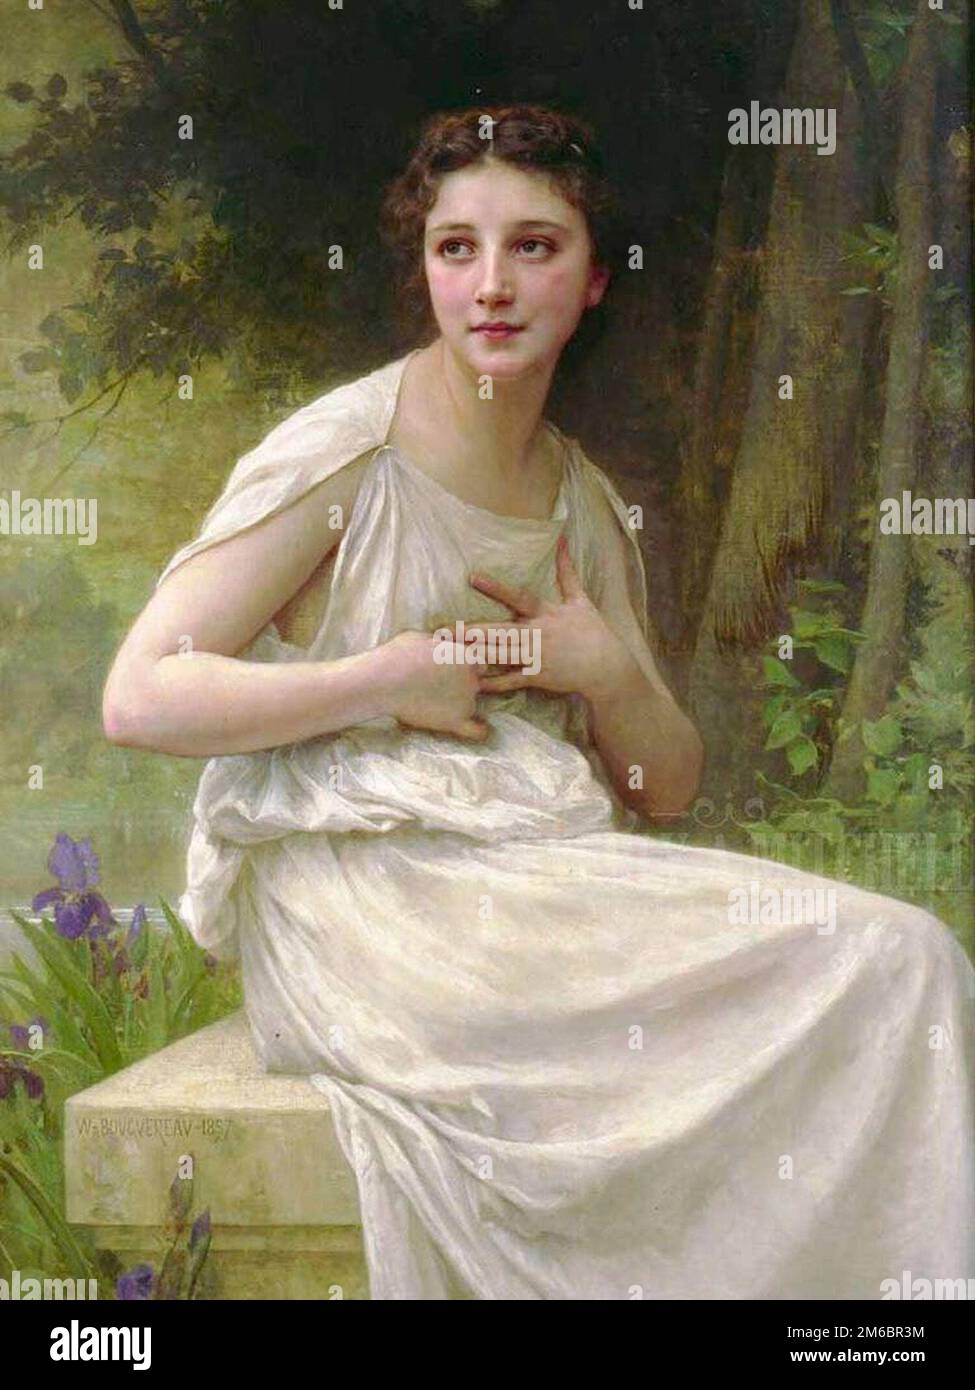 Réflexion (Reflection) painted by nineteenth-century French painter William-Adolphe Bouguereau in 1898 Stock Photo